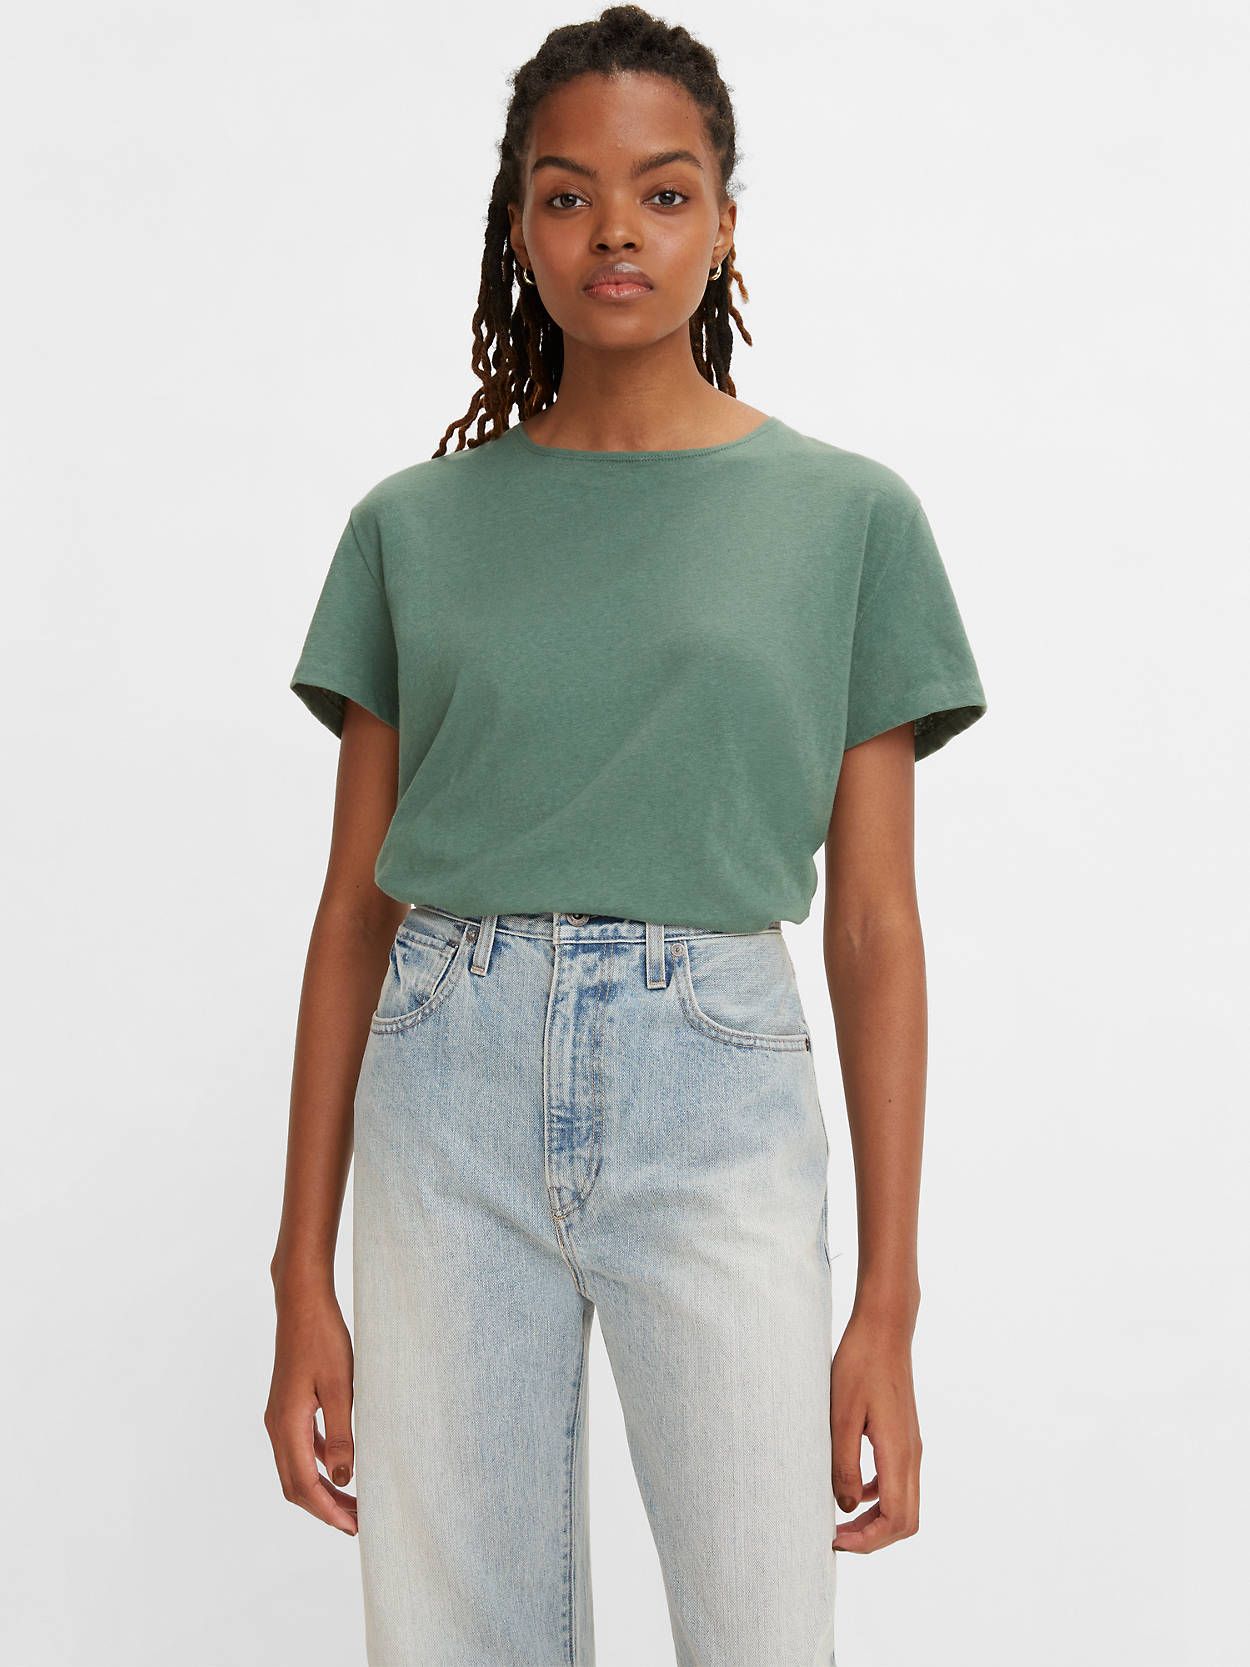 Silver Pine - Green | LEVI'S (US)